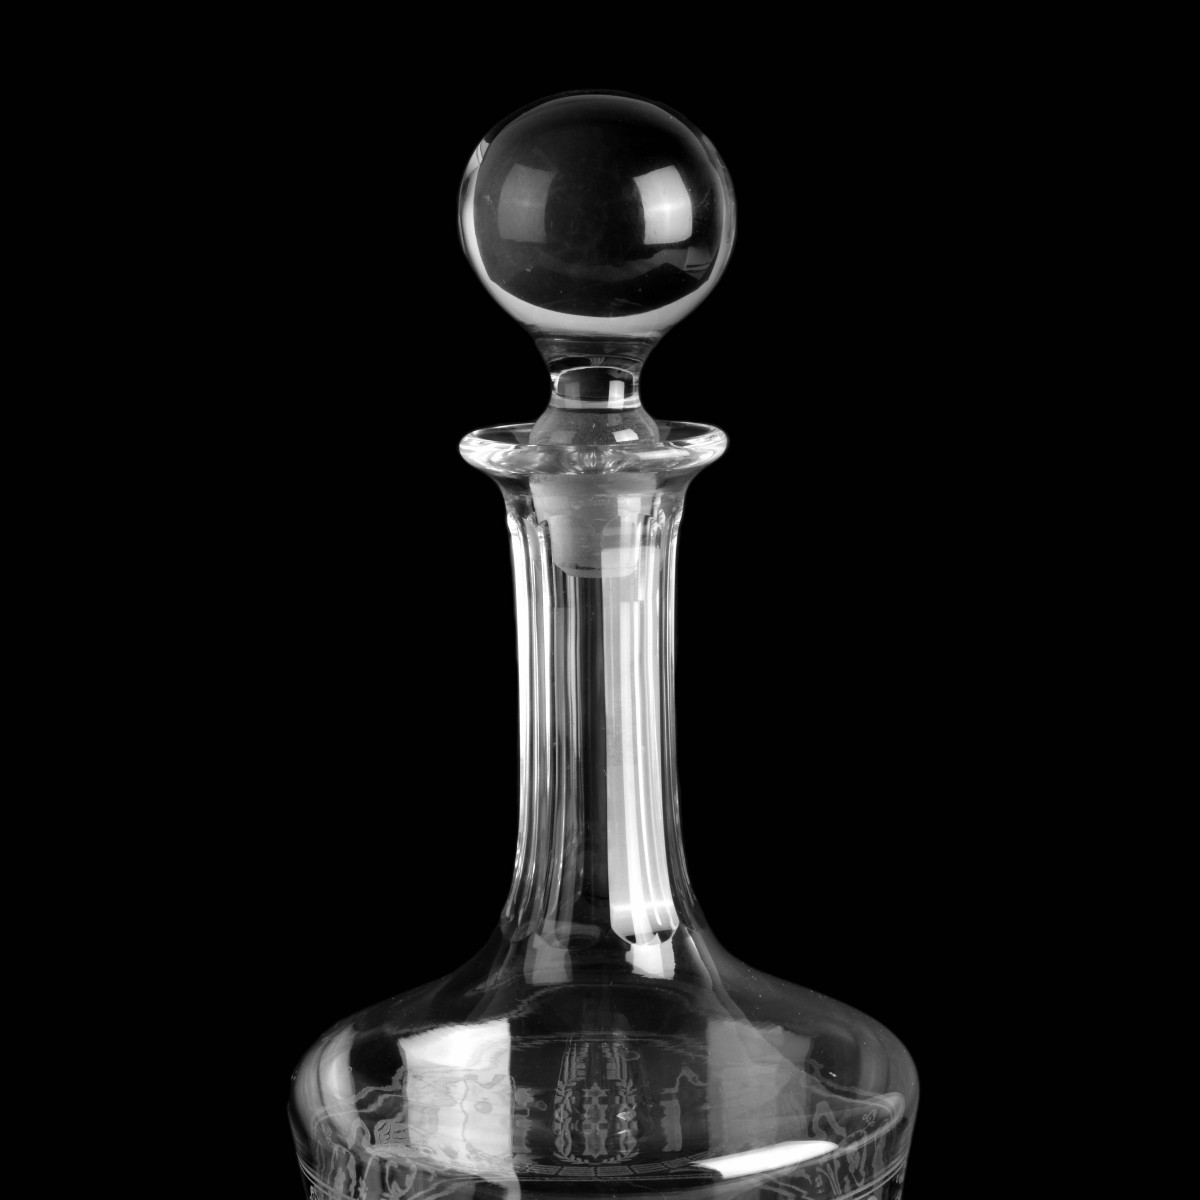 Baccarat Crystal Croizet Royal Reserve Decanter